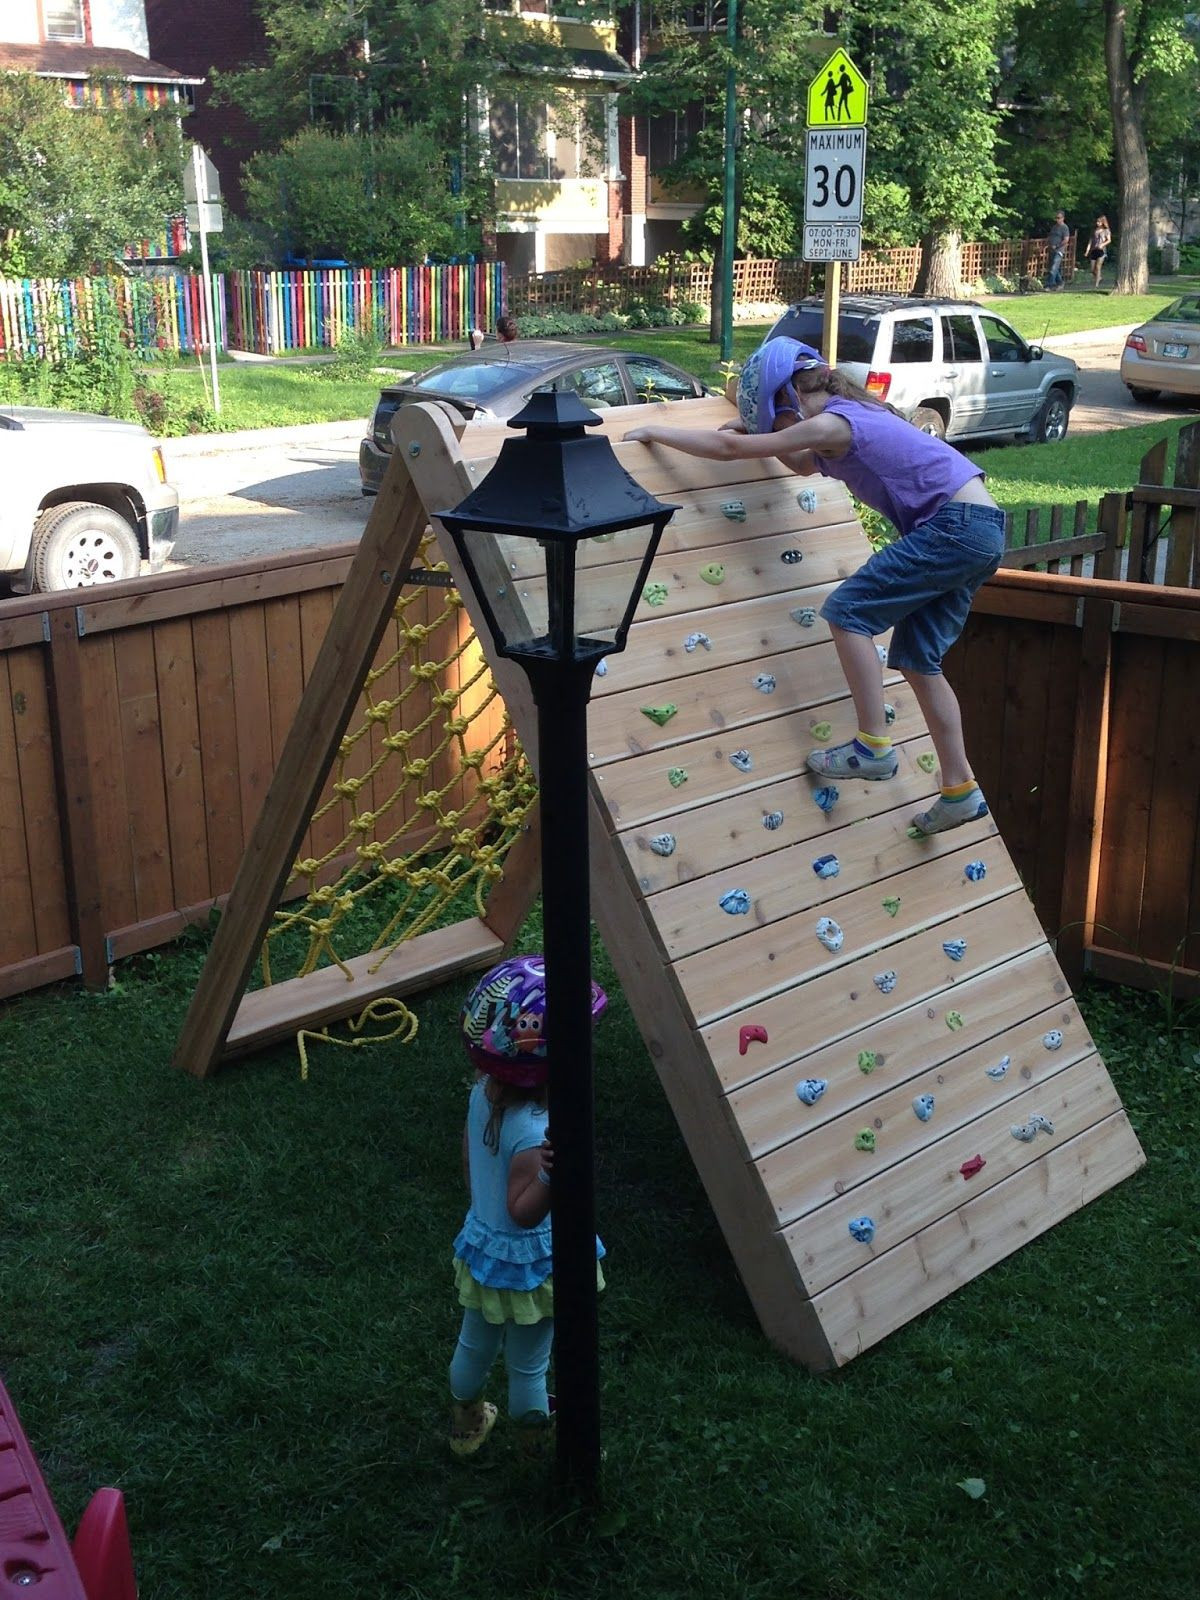 DIY Toddler Climbing Wall
 My wife was looking at play structures to give our three